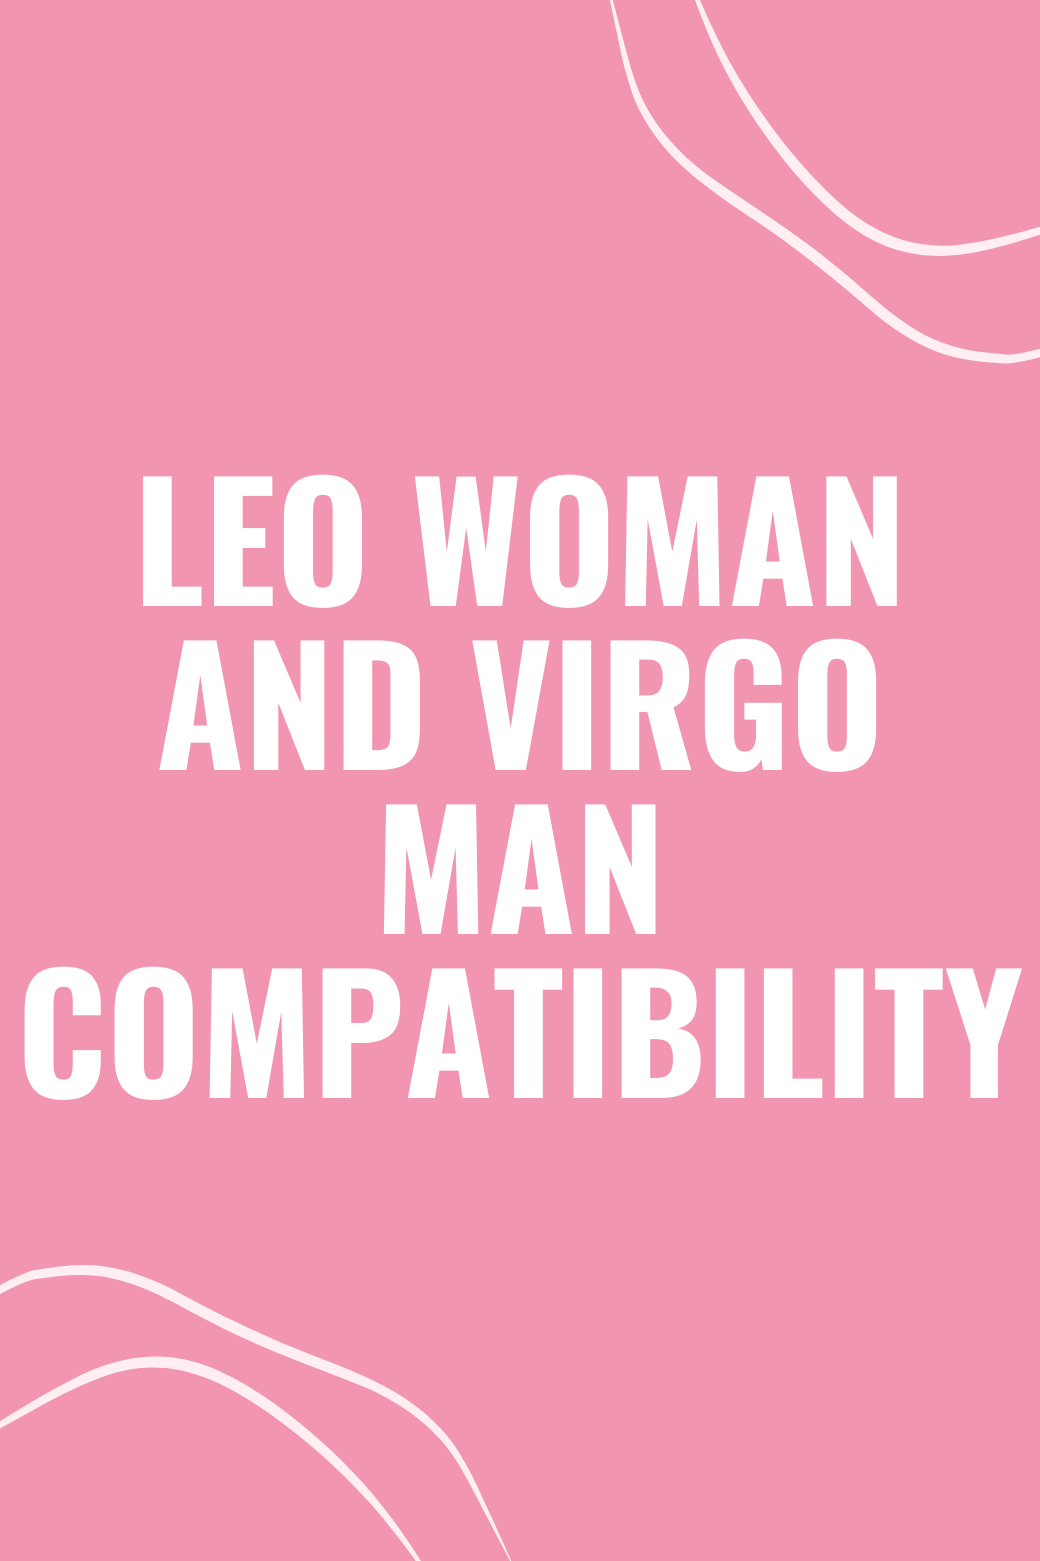 Leo Woman and Virgo Man Compatibility